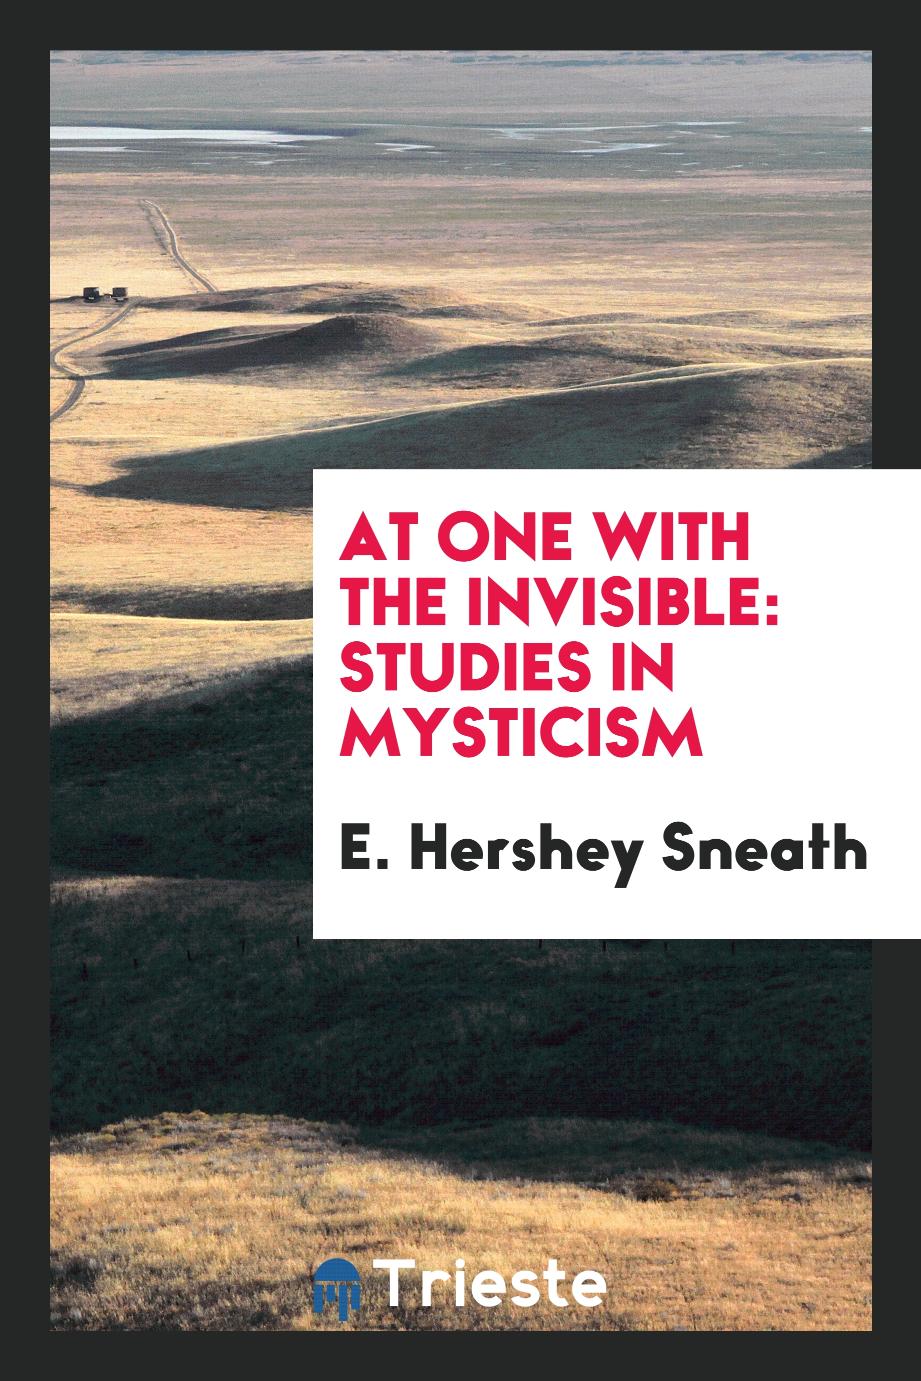 At One with the Invisible: Studies in Mysticism